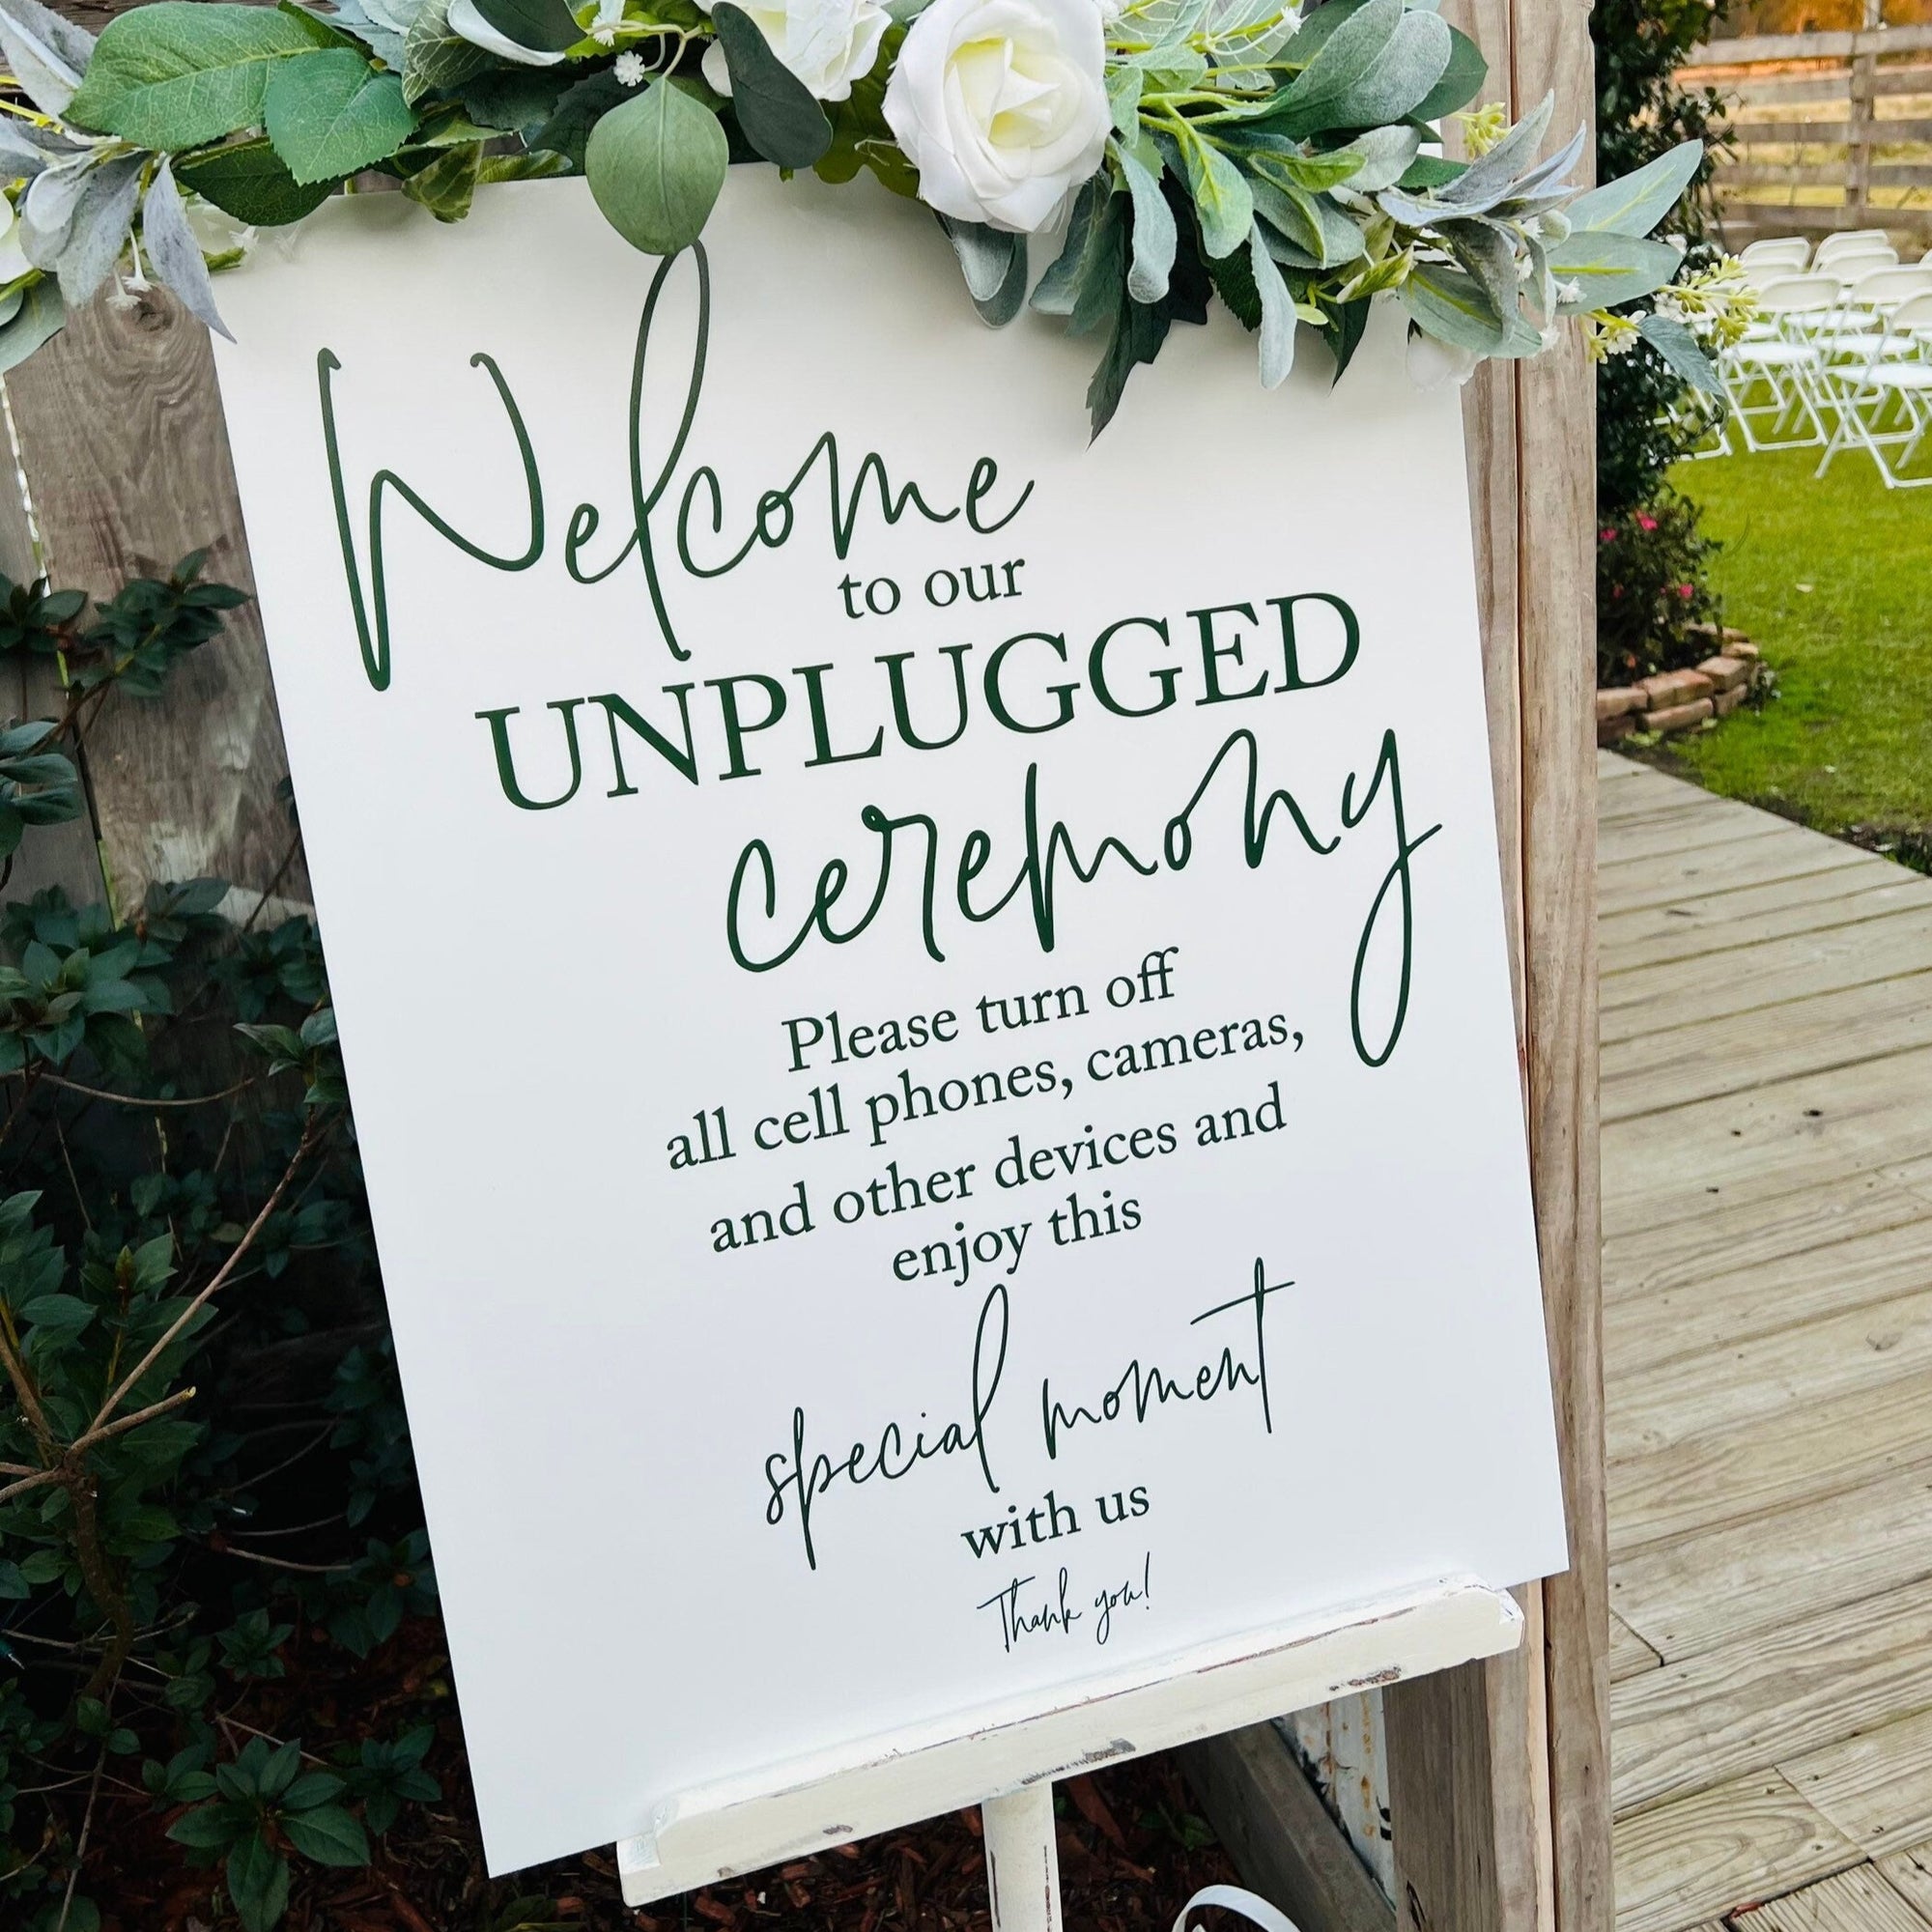 Unplugged Ceremony Clear Glass Look Acrylic Wedding Sign, Unplug Be Present and Enjoy This Moment Photographers Handle Rest Lucite Perspex